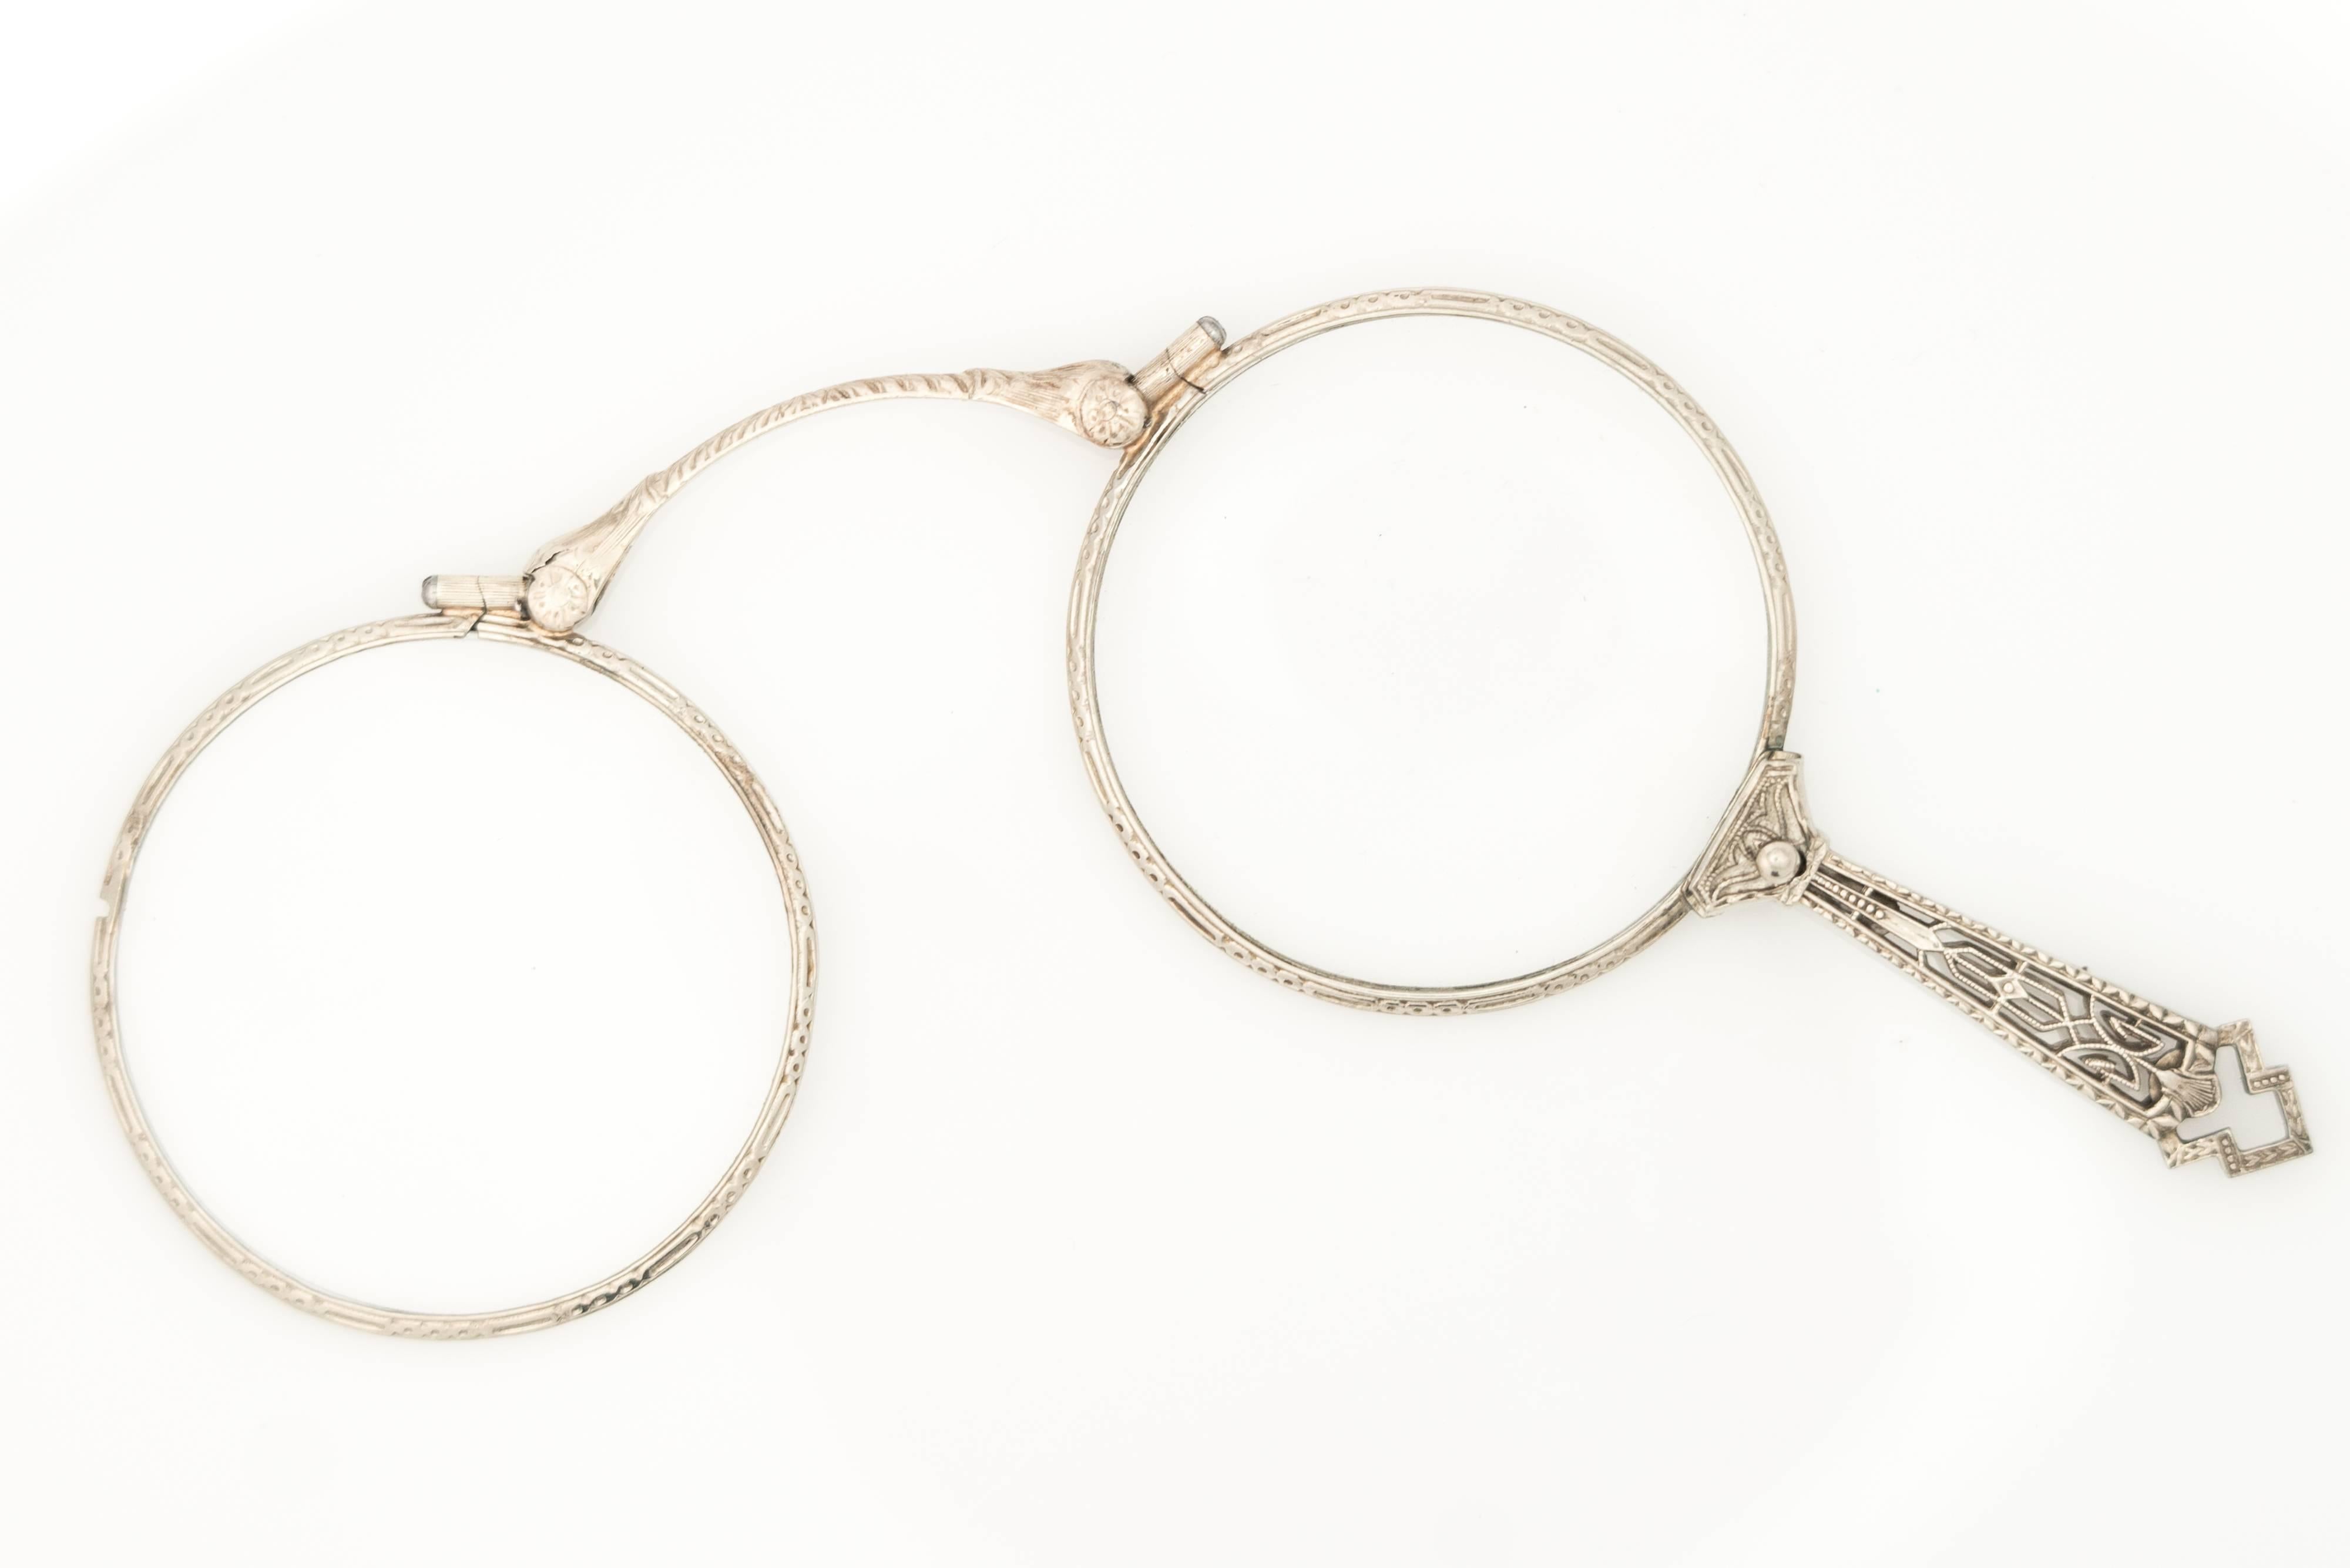 This stunning pair of 1920s folding 14 Karat White Gold Lorgnette Spectacles feature 2 lenses that fold over one another and lock into place to create a magnifying glass. A small pull lever at the top of the handle releases the lenses et voila, a